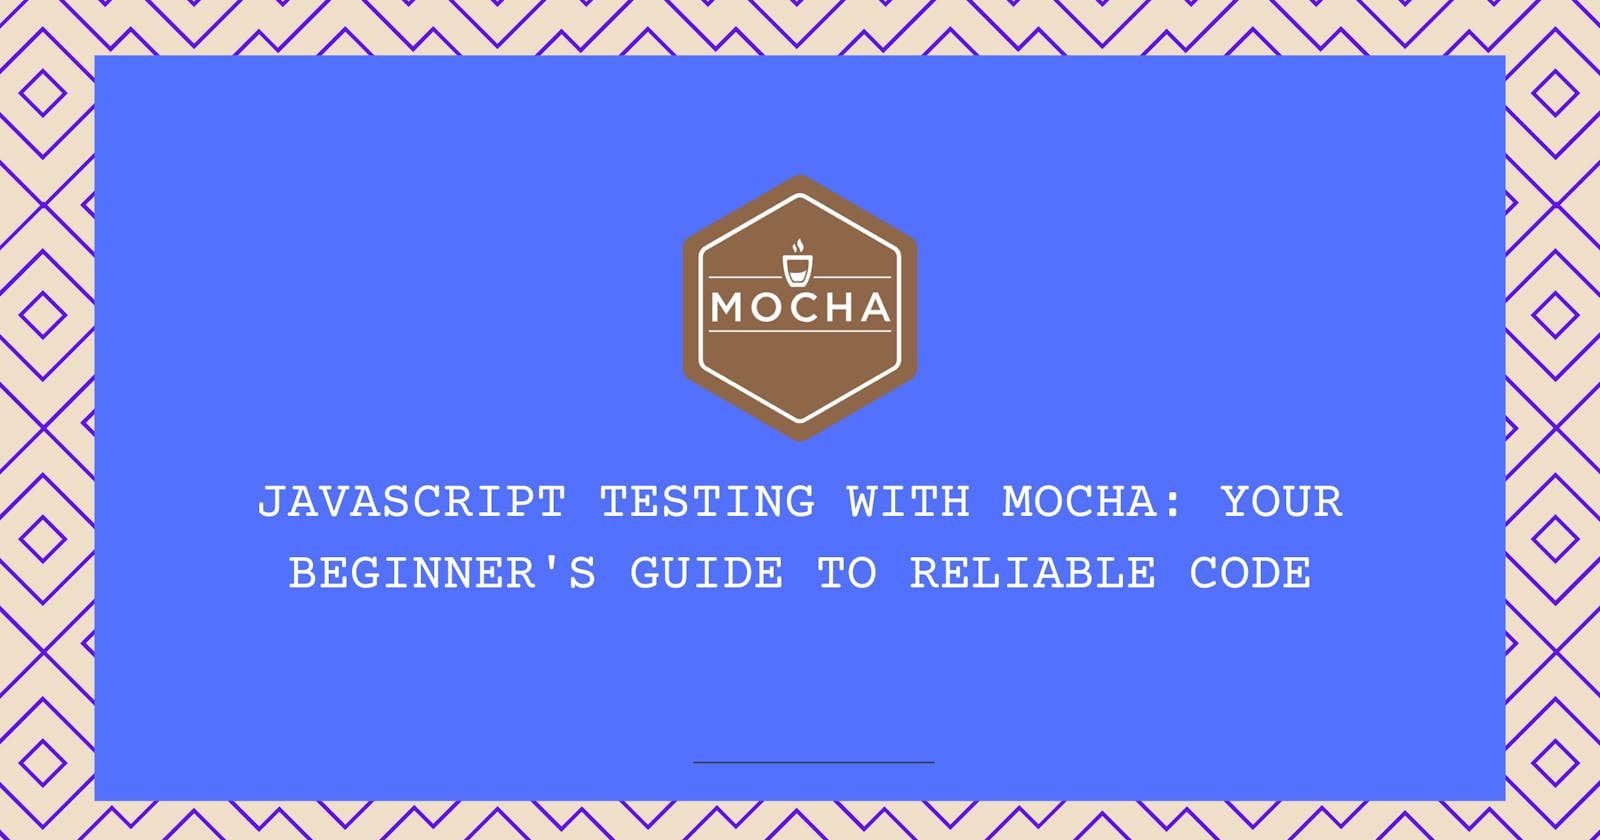 JavaScript Testing with Mocha: Your Beginner's Guide to Reliable Code